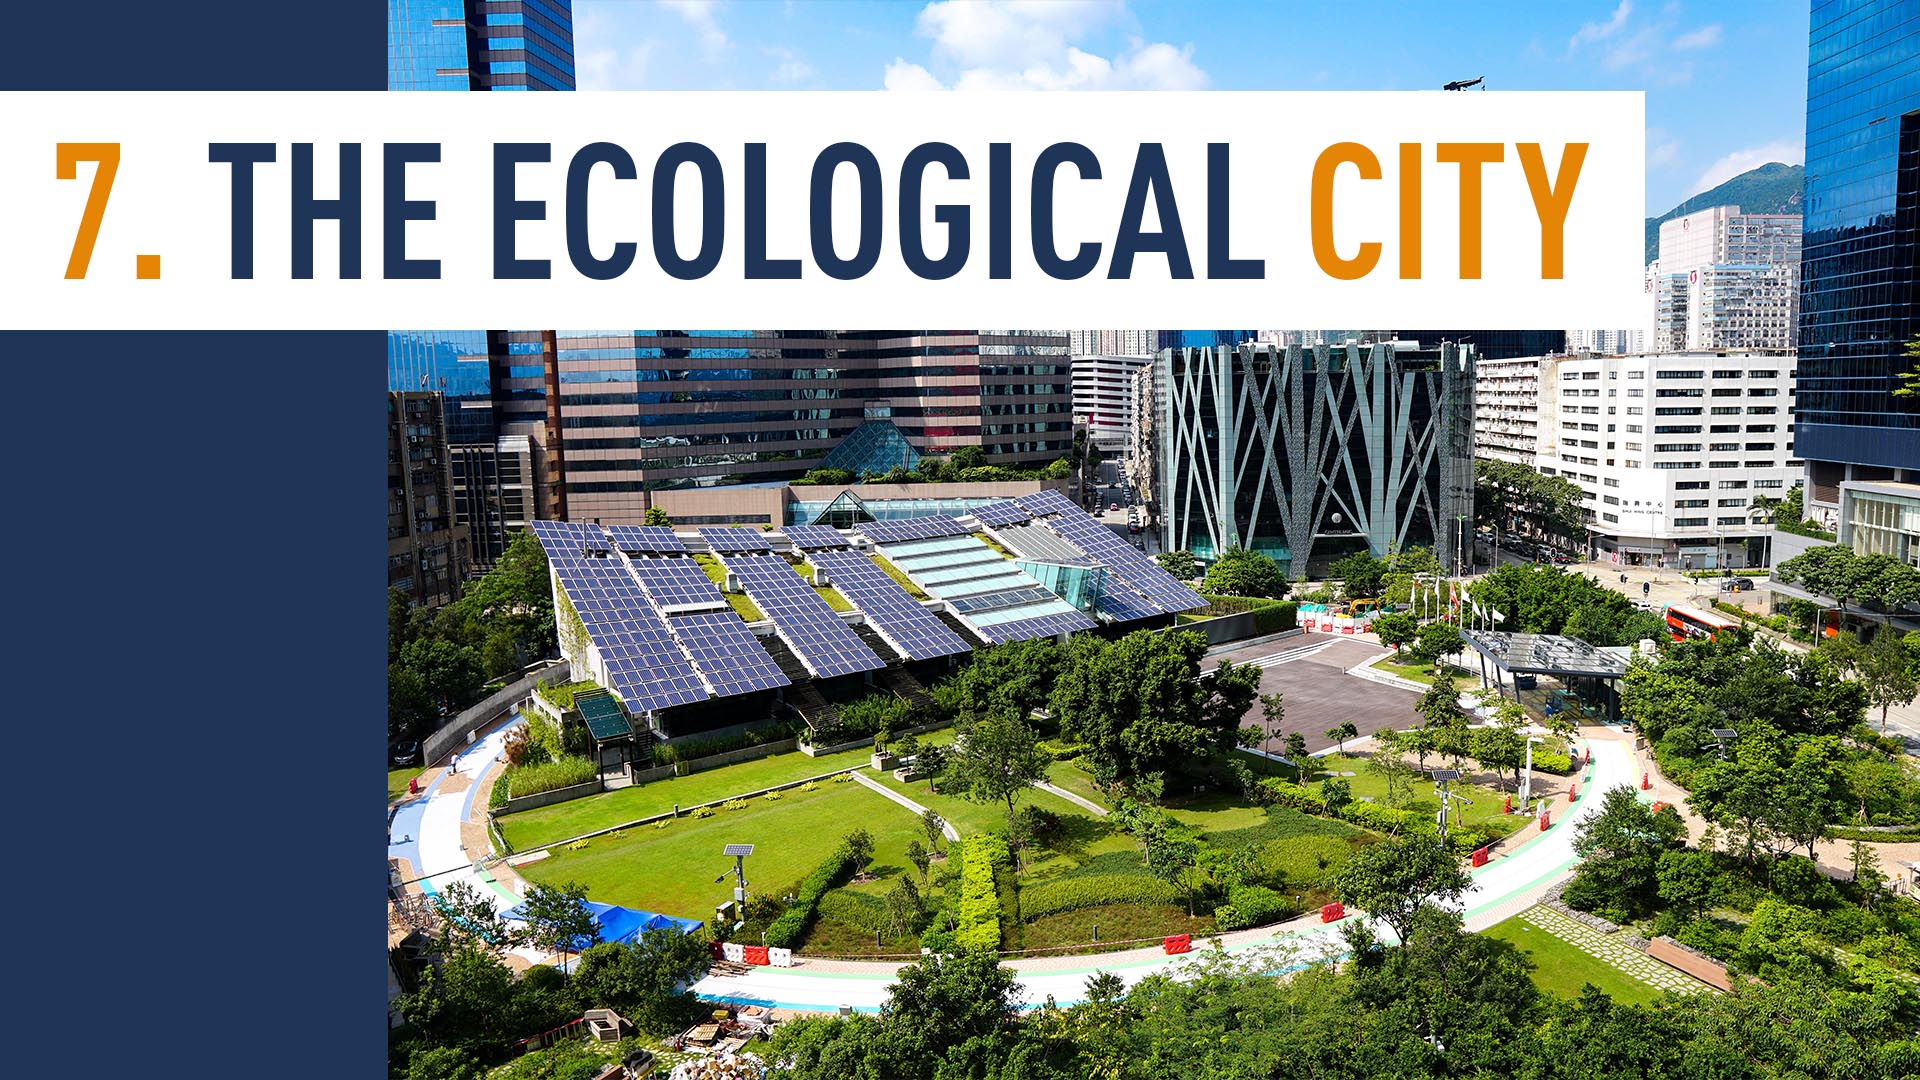 THE ECOLOGICAL CITY